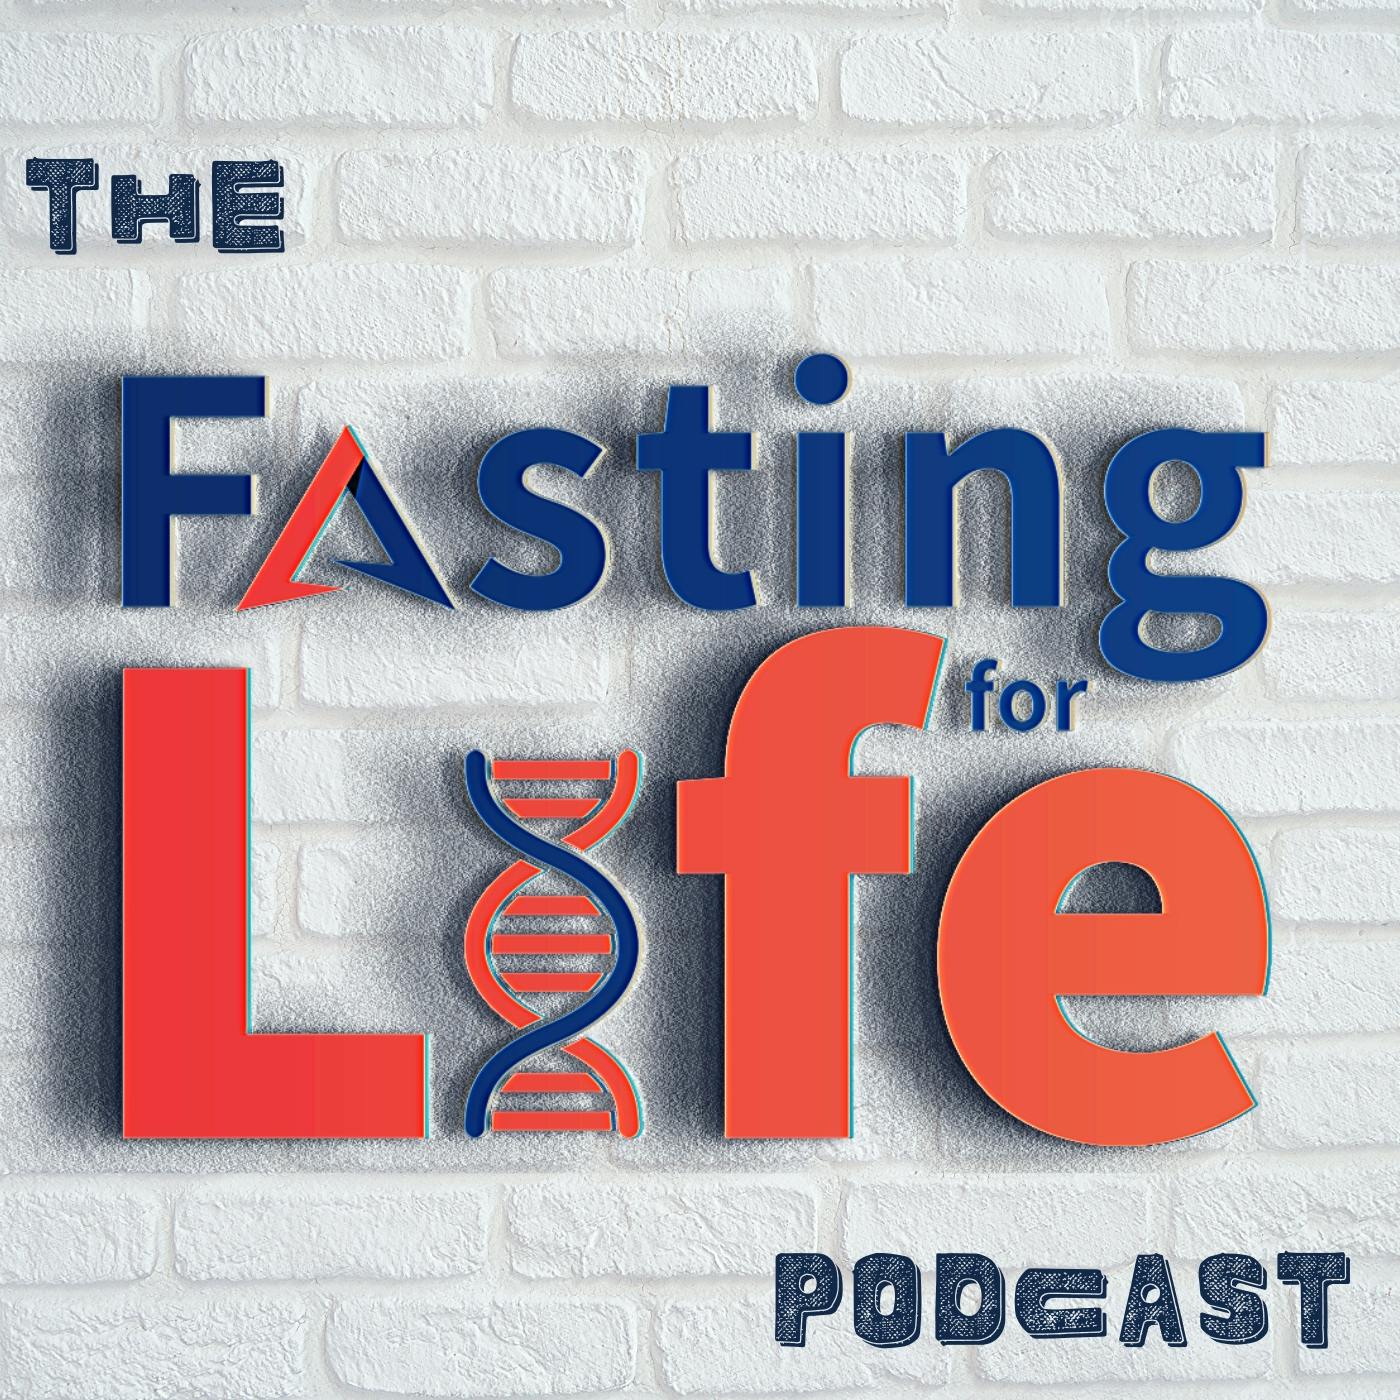 Ep. 206 - Holiday fasting tips & tricks | Top 5 factors to control blood sugar & insulin | Balancing fasting, weight, & food relationships | Managing stress, sleep & food choices for better health | E